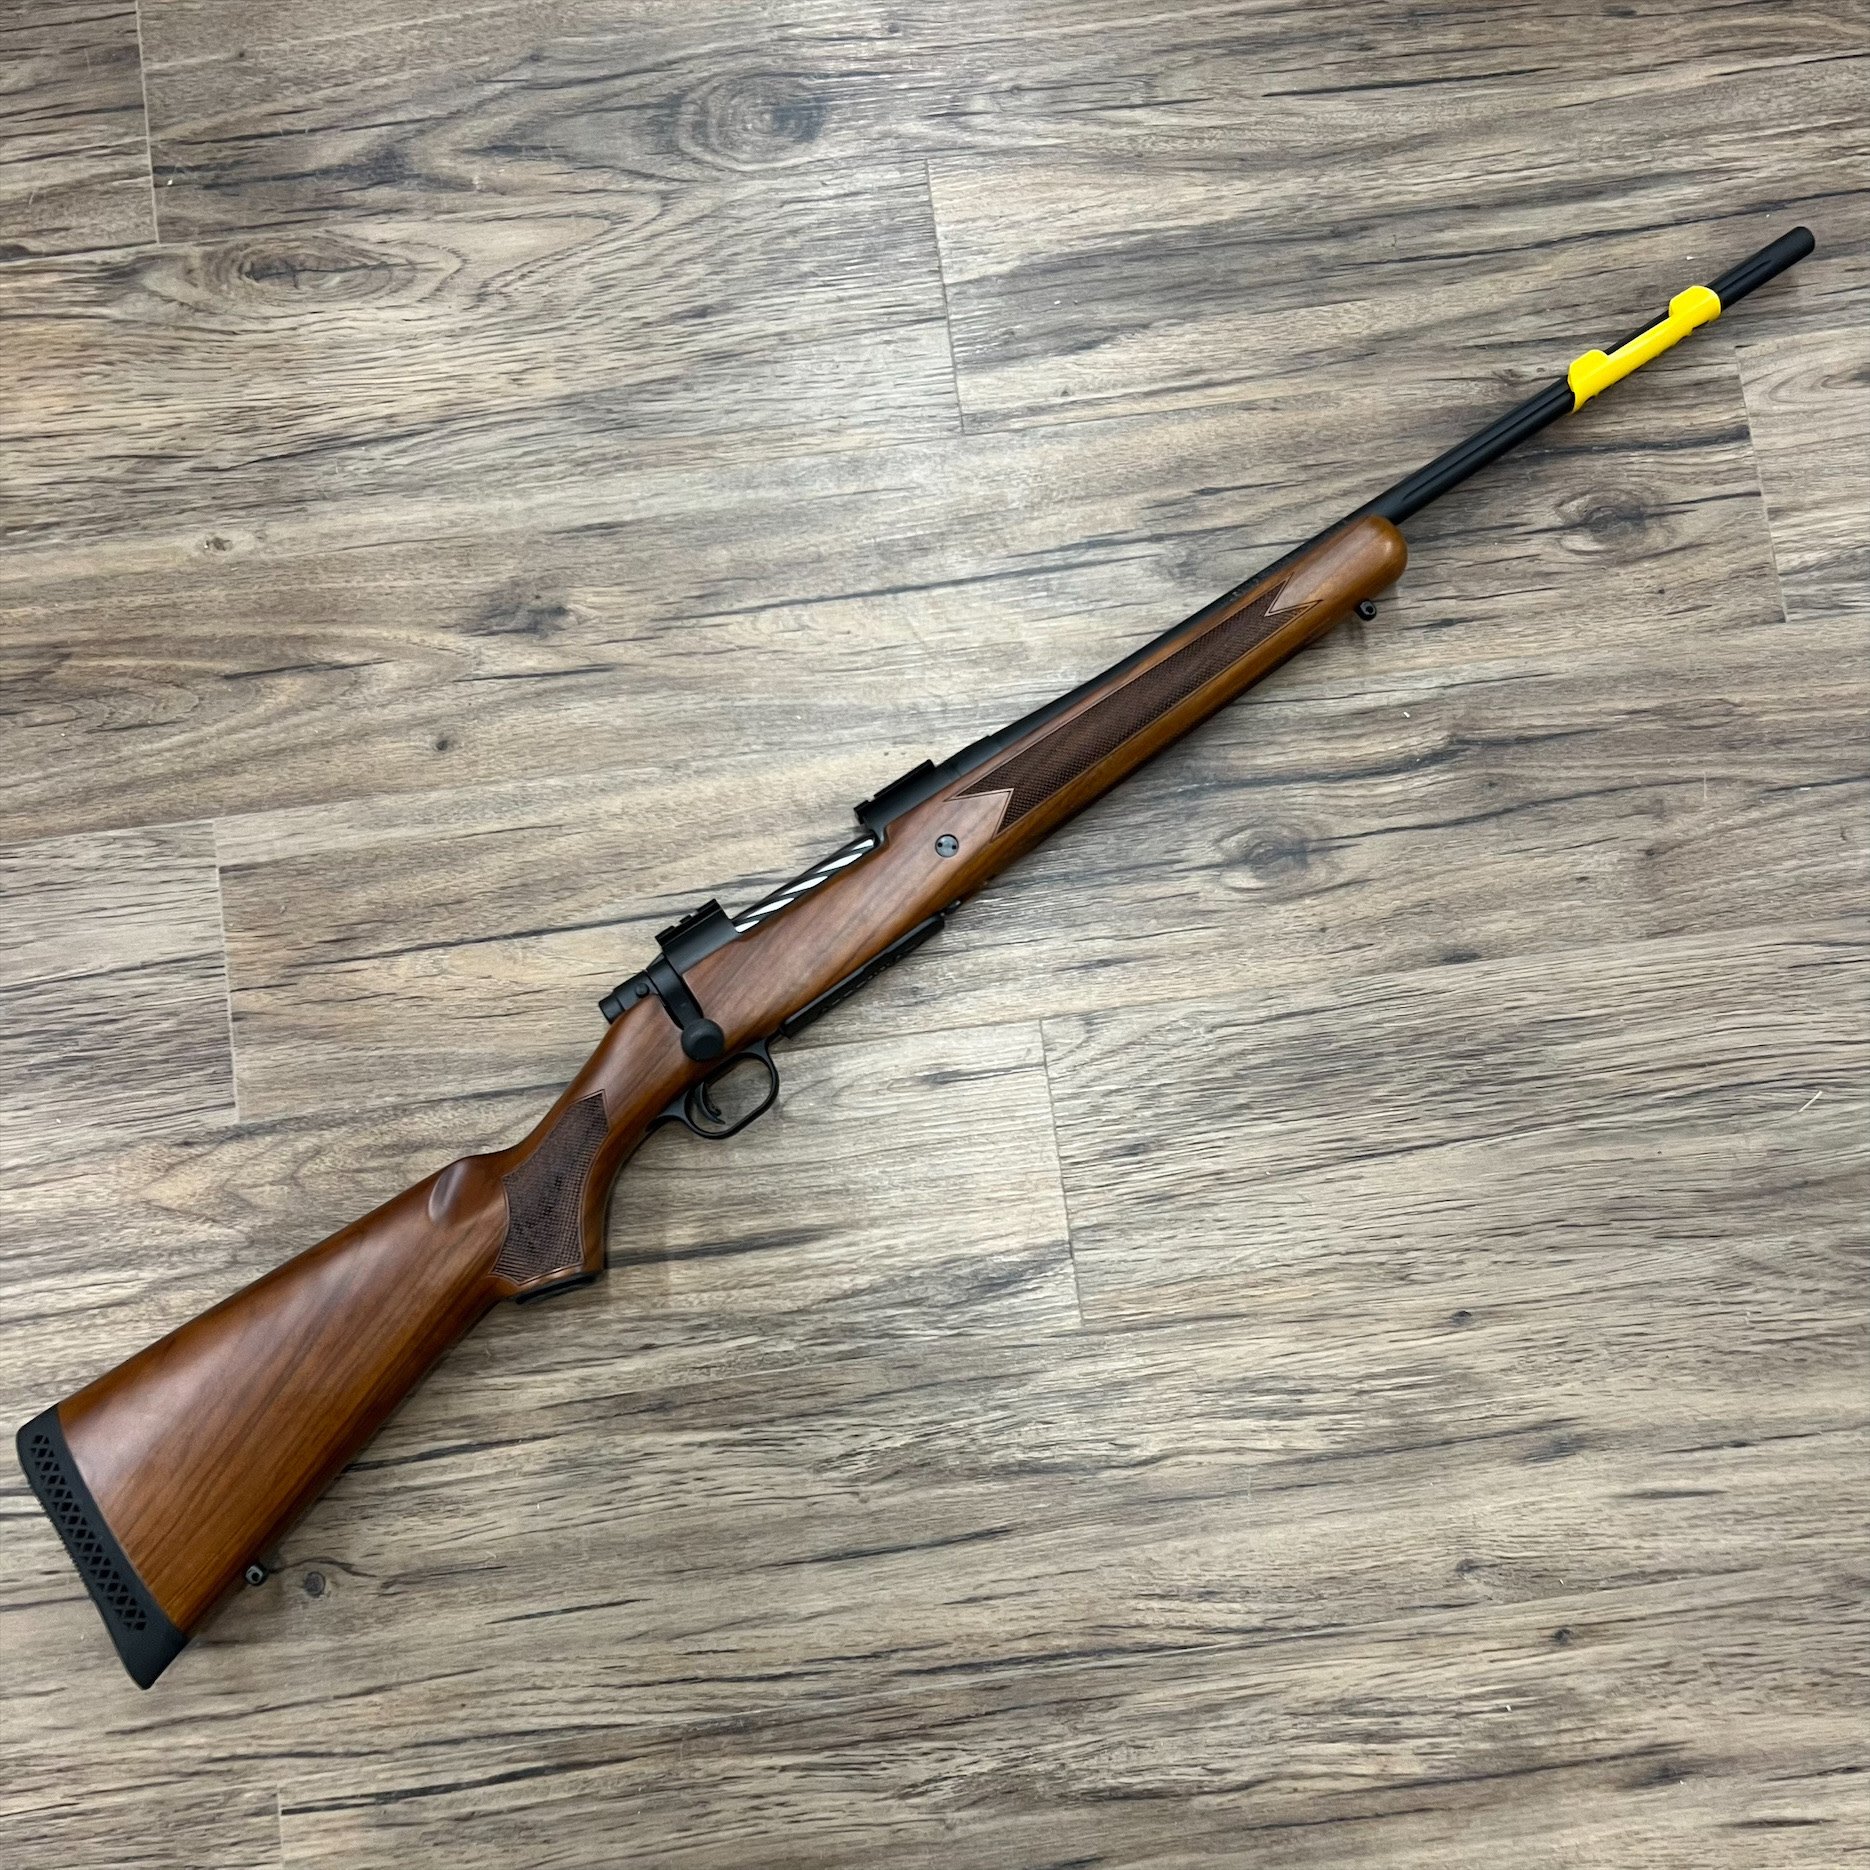 MOSSBERG MOSSBERG PATRIOT CLASSIC RIFLE, 30-06 SPRG, WALNUT STOCK, UNFIRED, PRE-OWNED